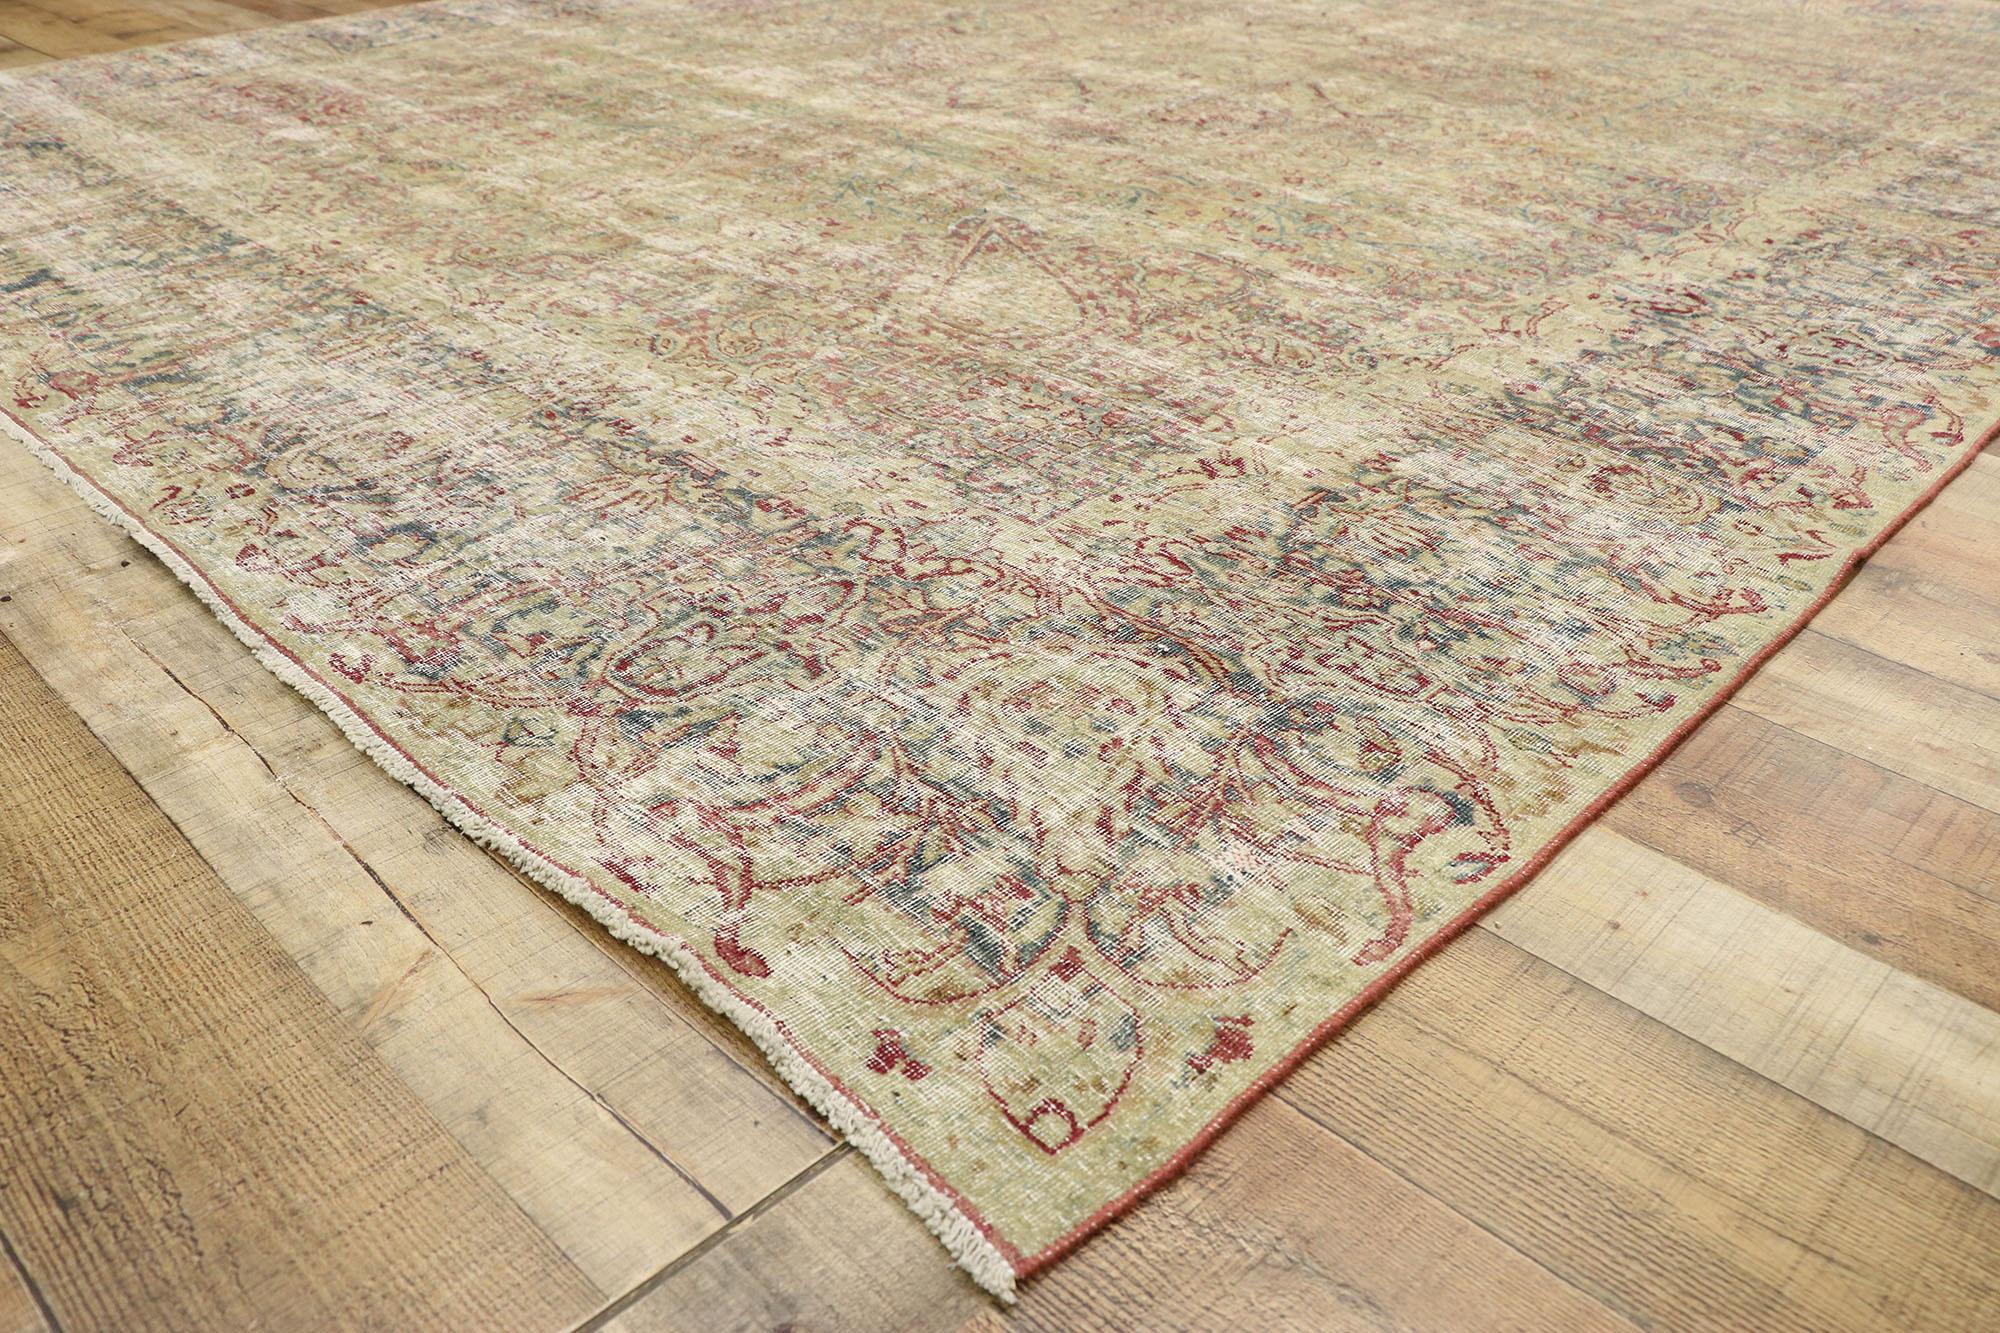 19th Century Distressed Antique Persian Kerman Rug with Modern Rustic English Cottage Style For Sale